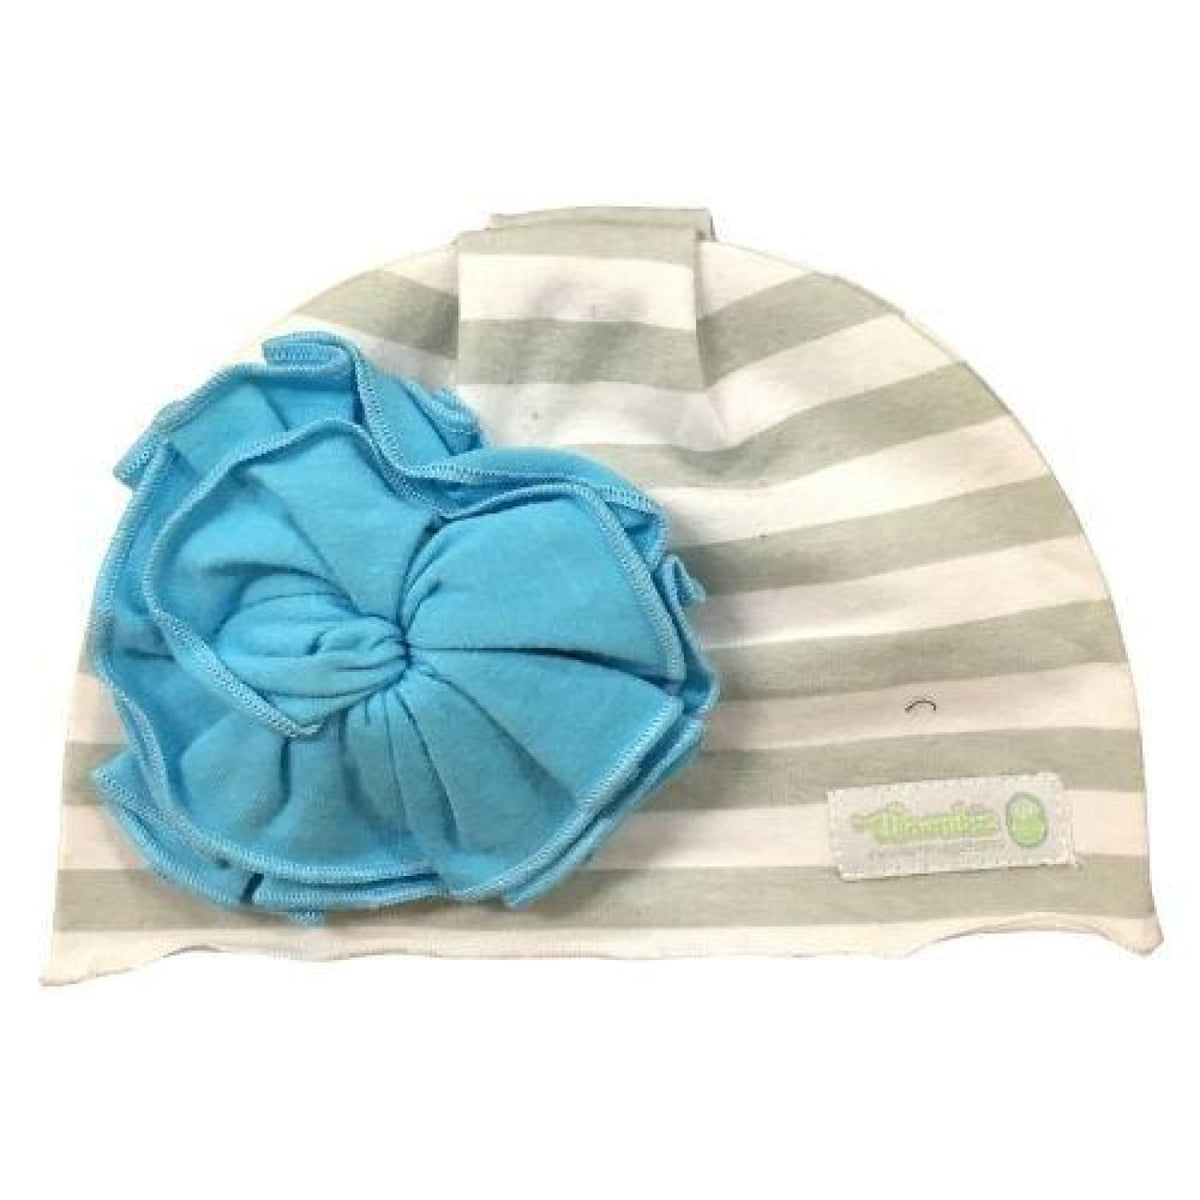 Woombie Flower Aqua Beanie 0-6M - 0-6m / Grey/White Striped - BABY &amp; TODDLER CLOTHING - BEANIES/HATS